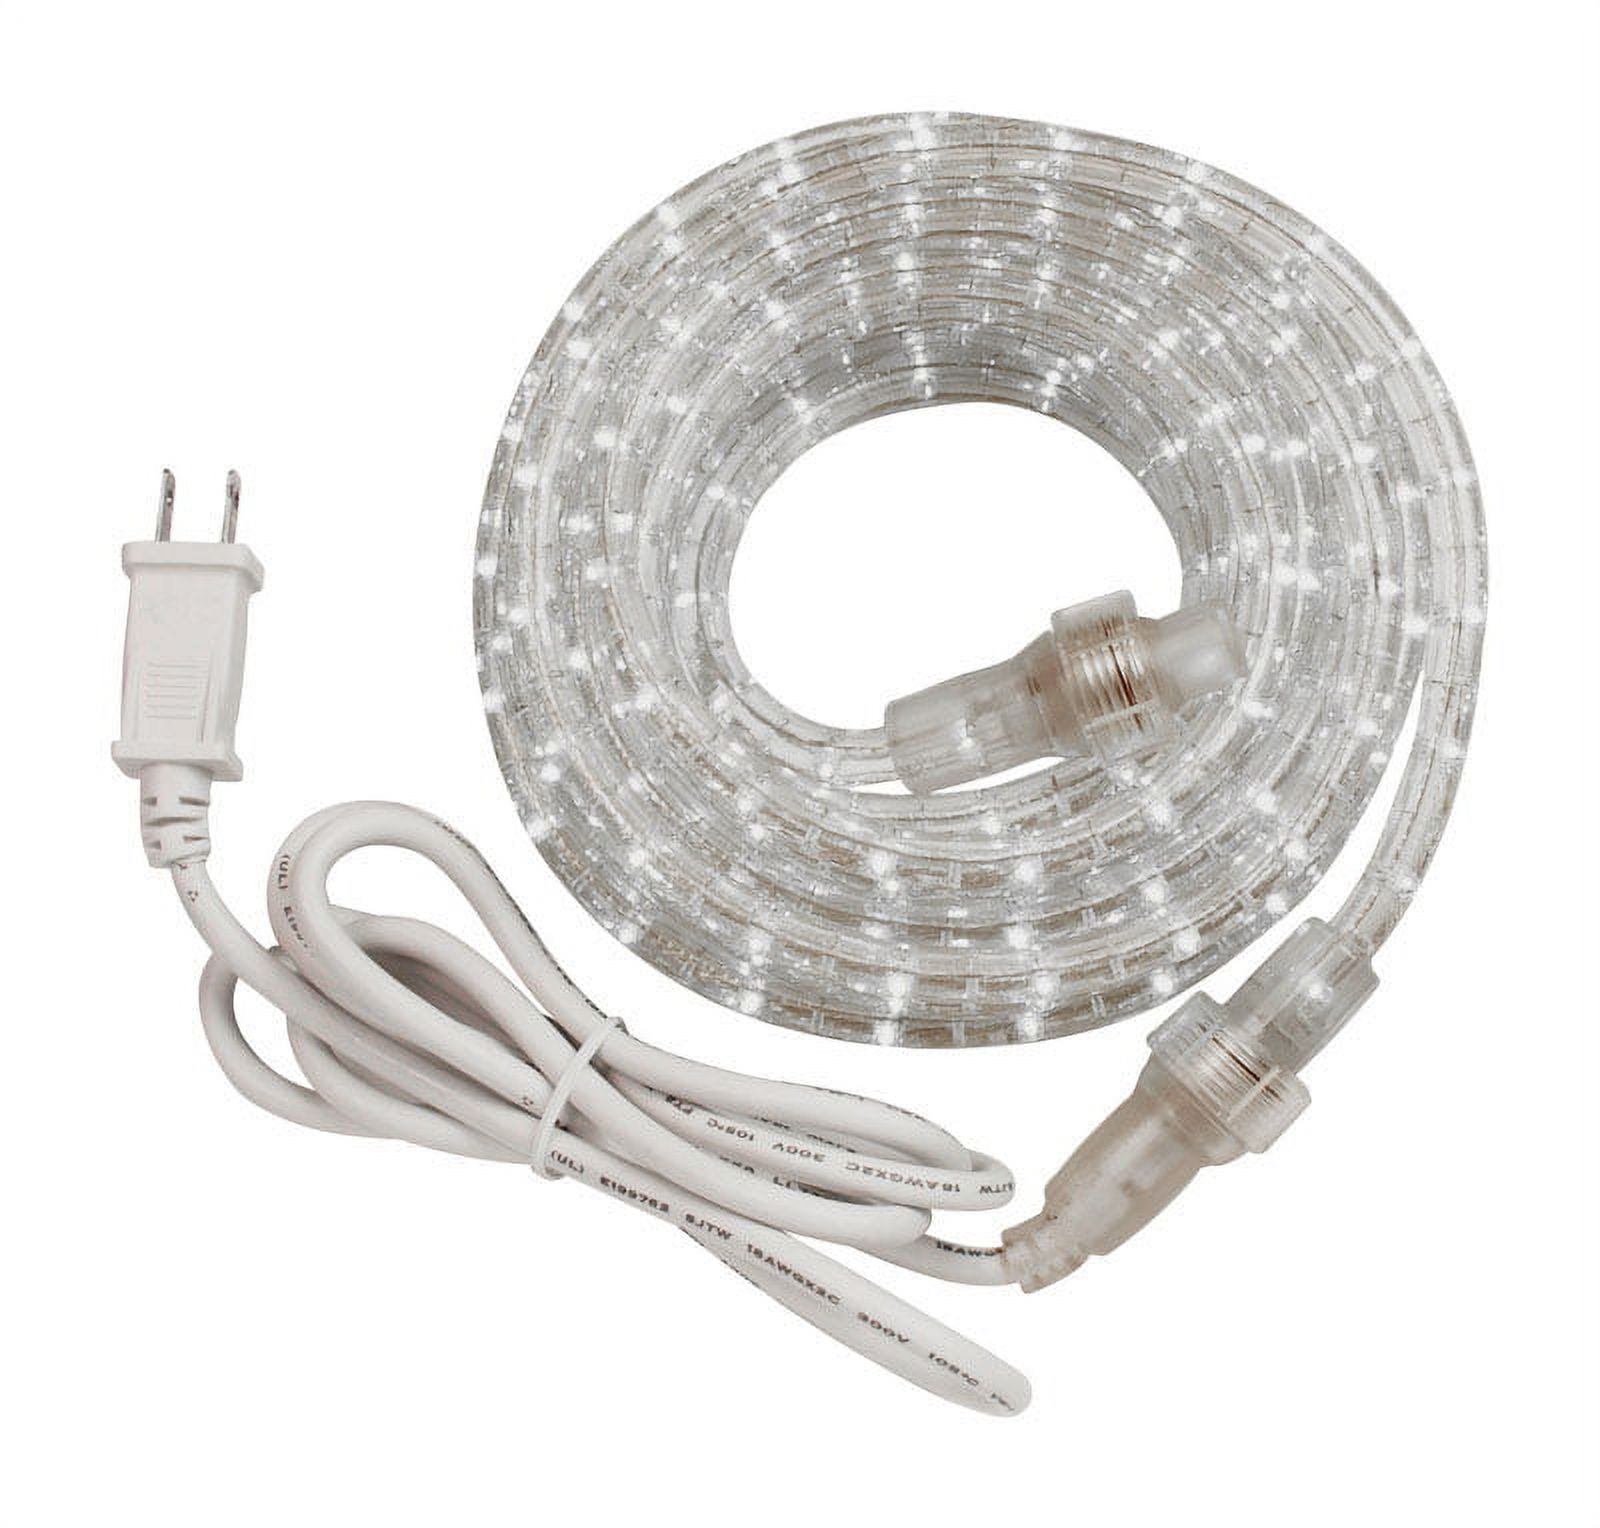 9783051 12 Ft. Decorative Clear Rope Light